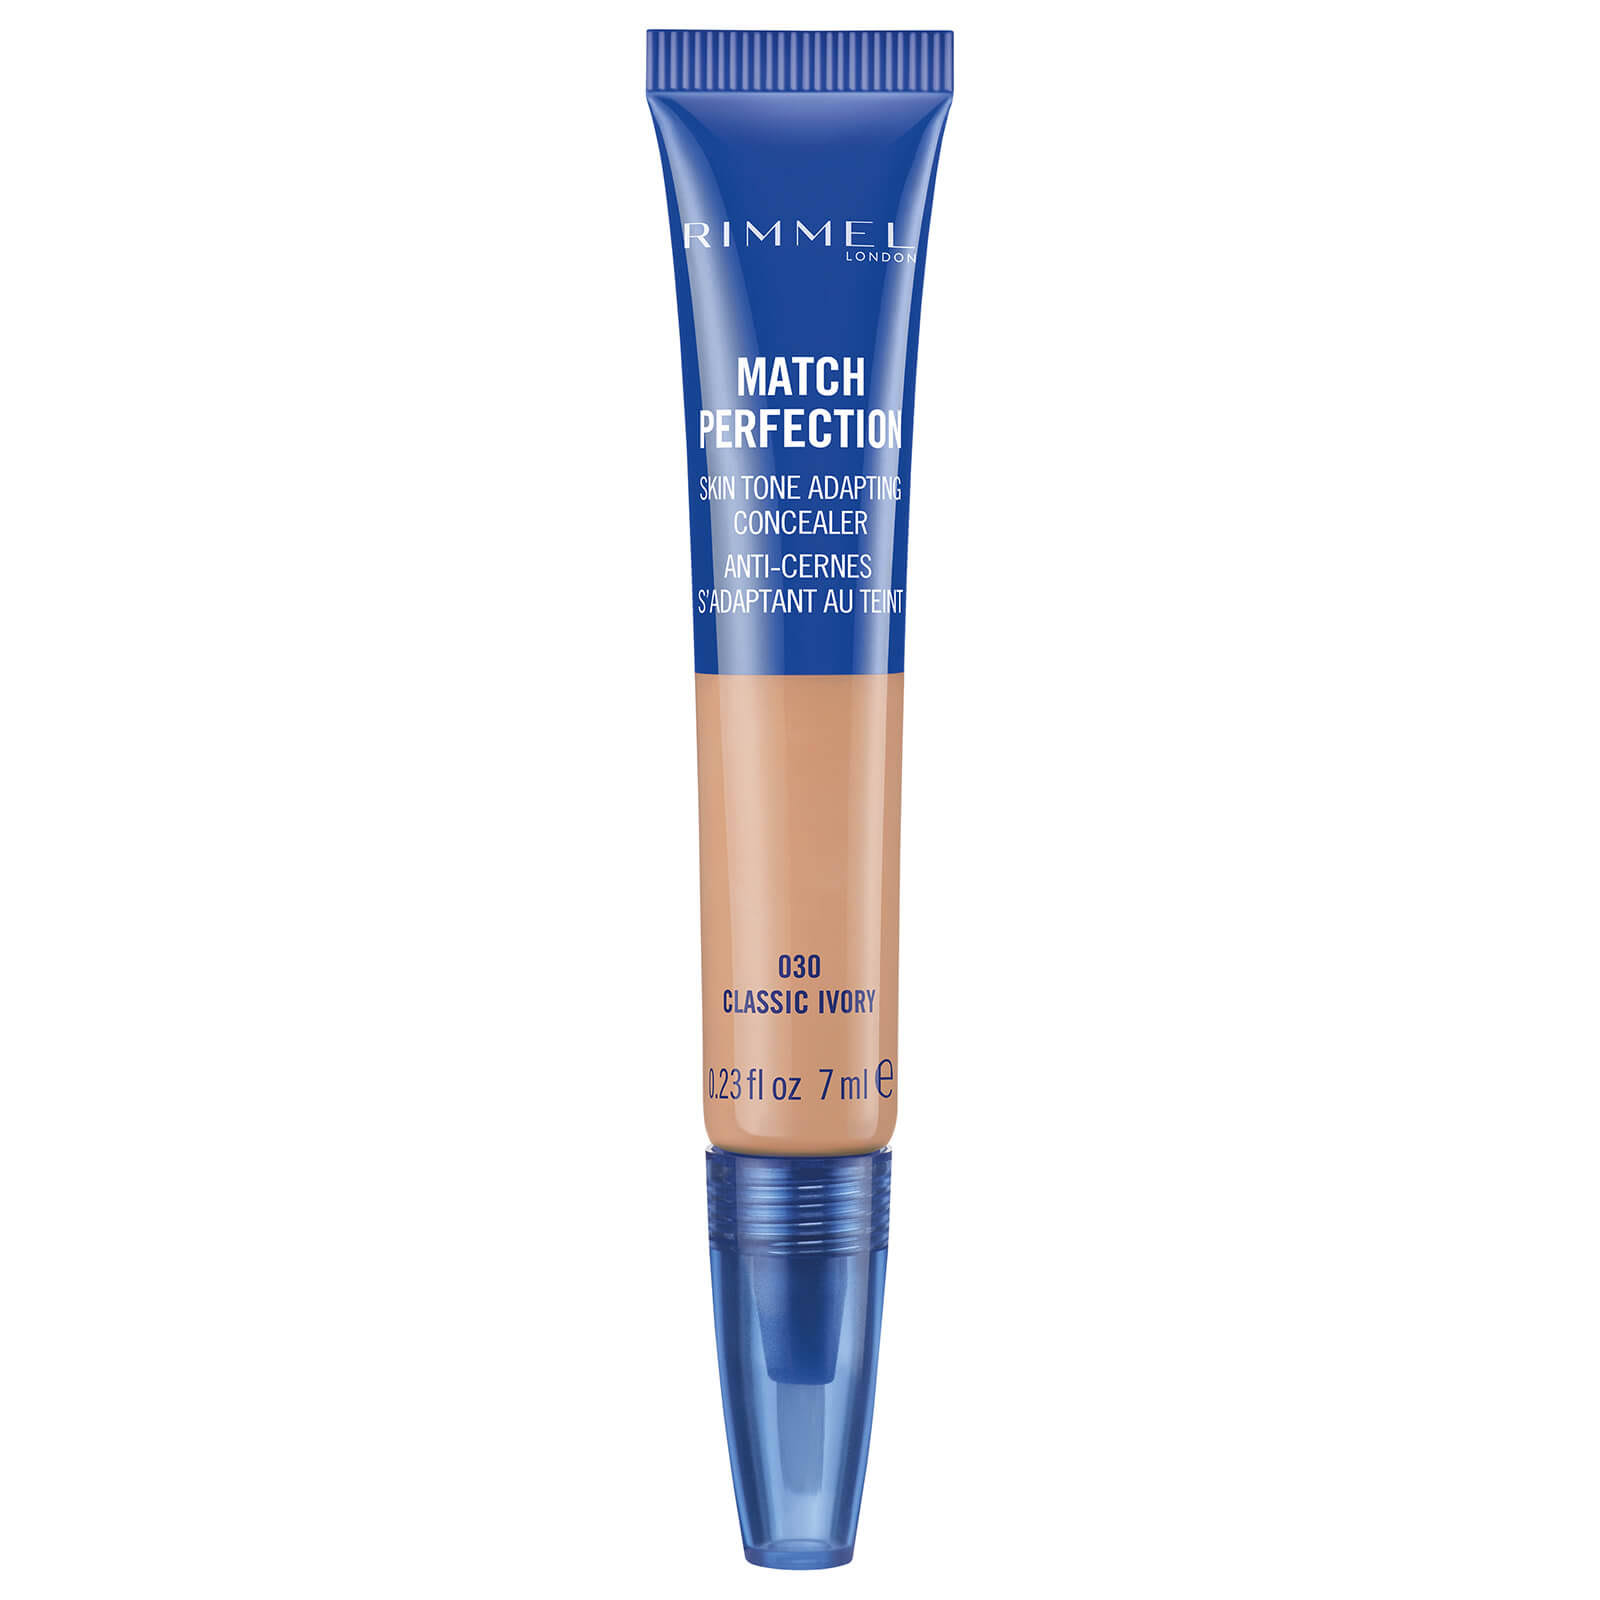 Rimmel Match Perfection Concealer - Classic Ivory, 7ml